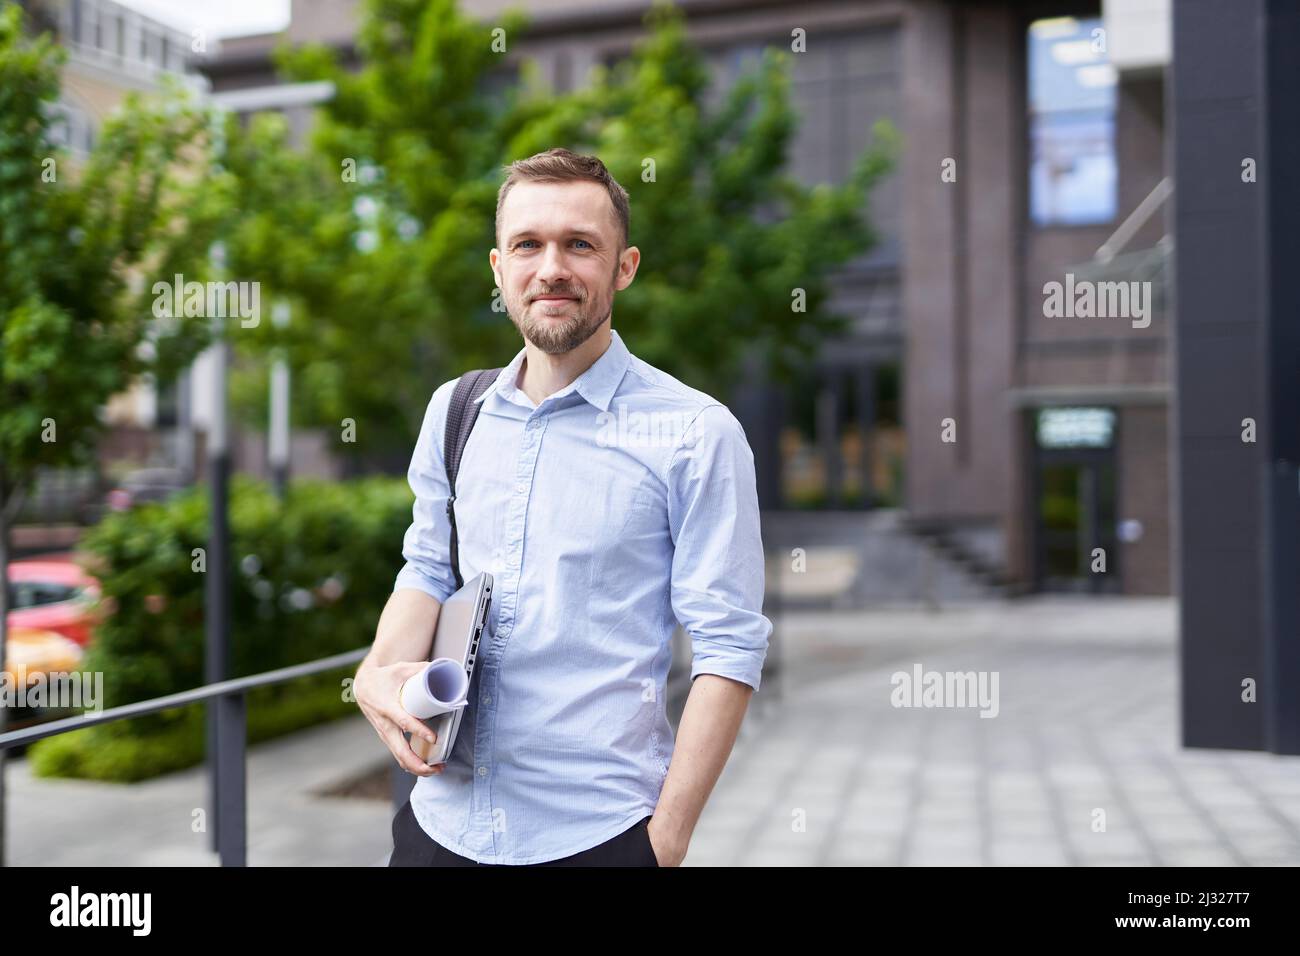 Portrait of successful and confident real estate agent, businessman or financial manager. Smiling successful stylish bearded business man standing on a street with urban background. High quality image Stock Photo